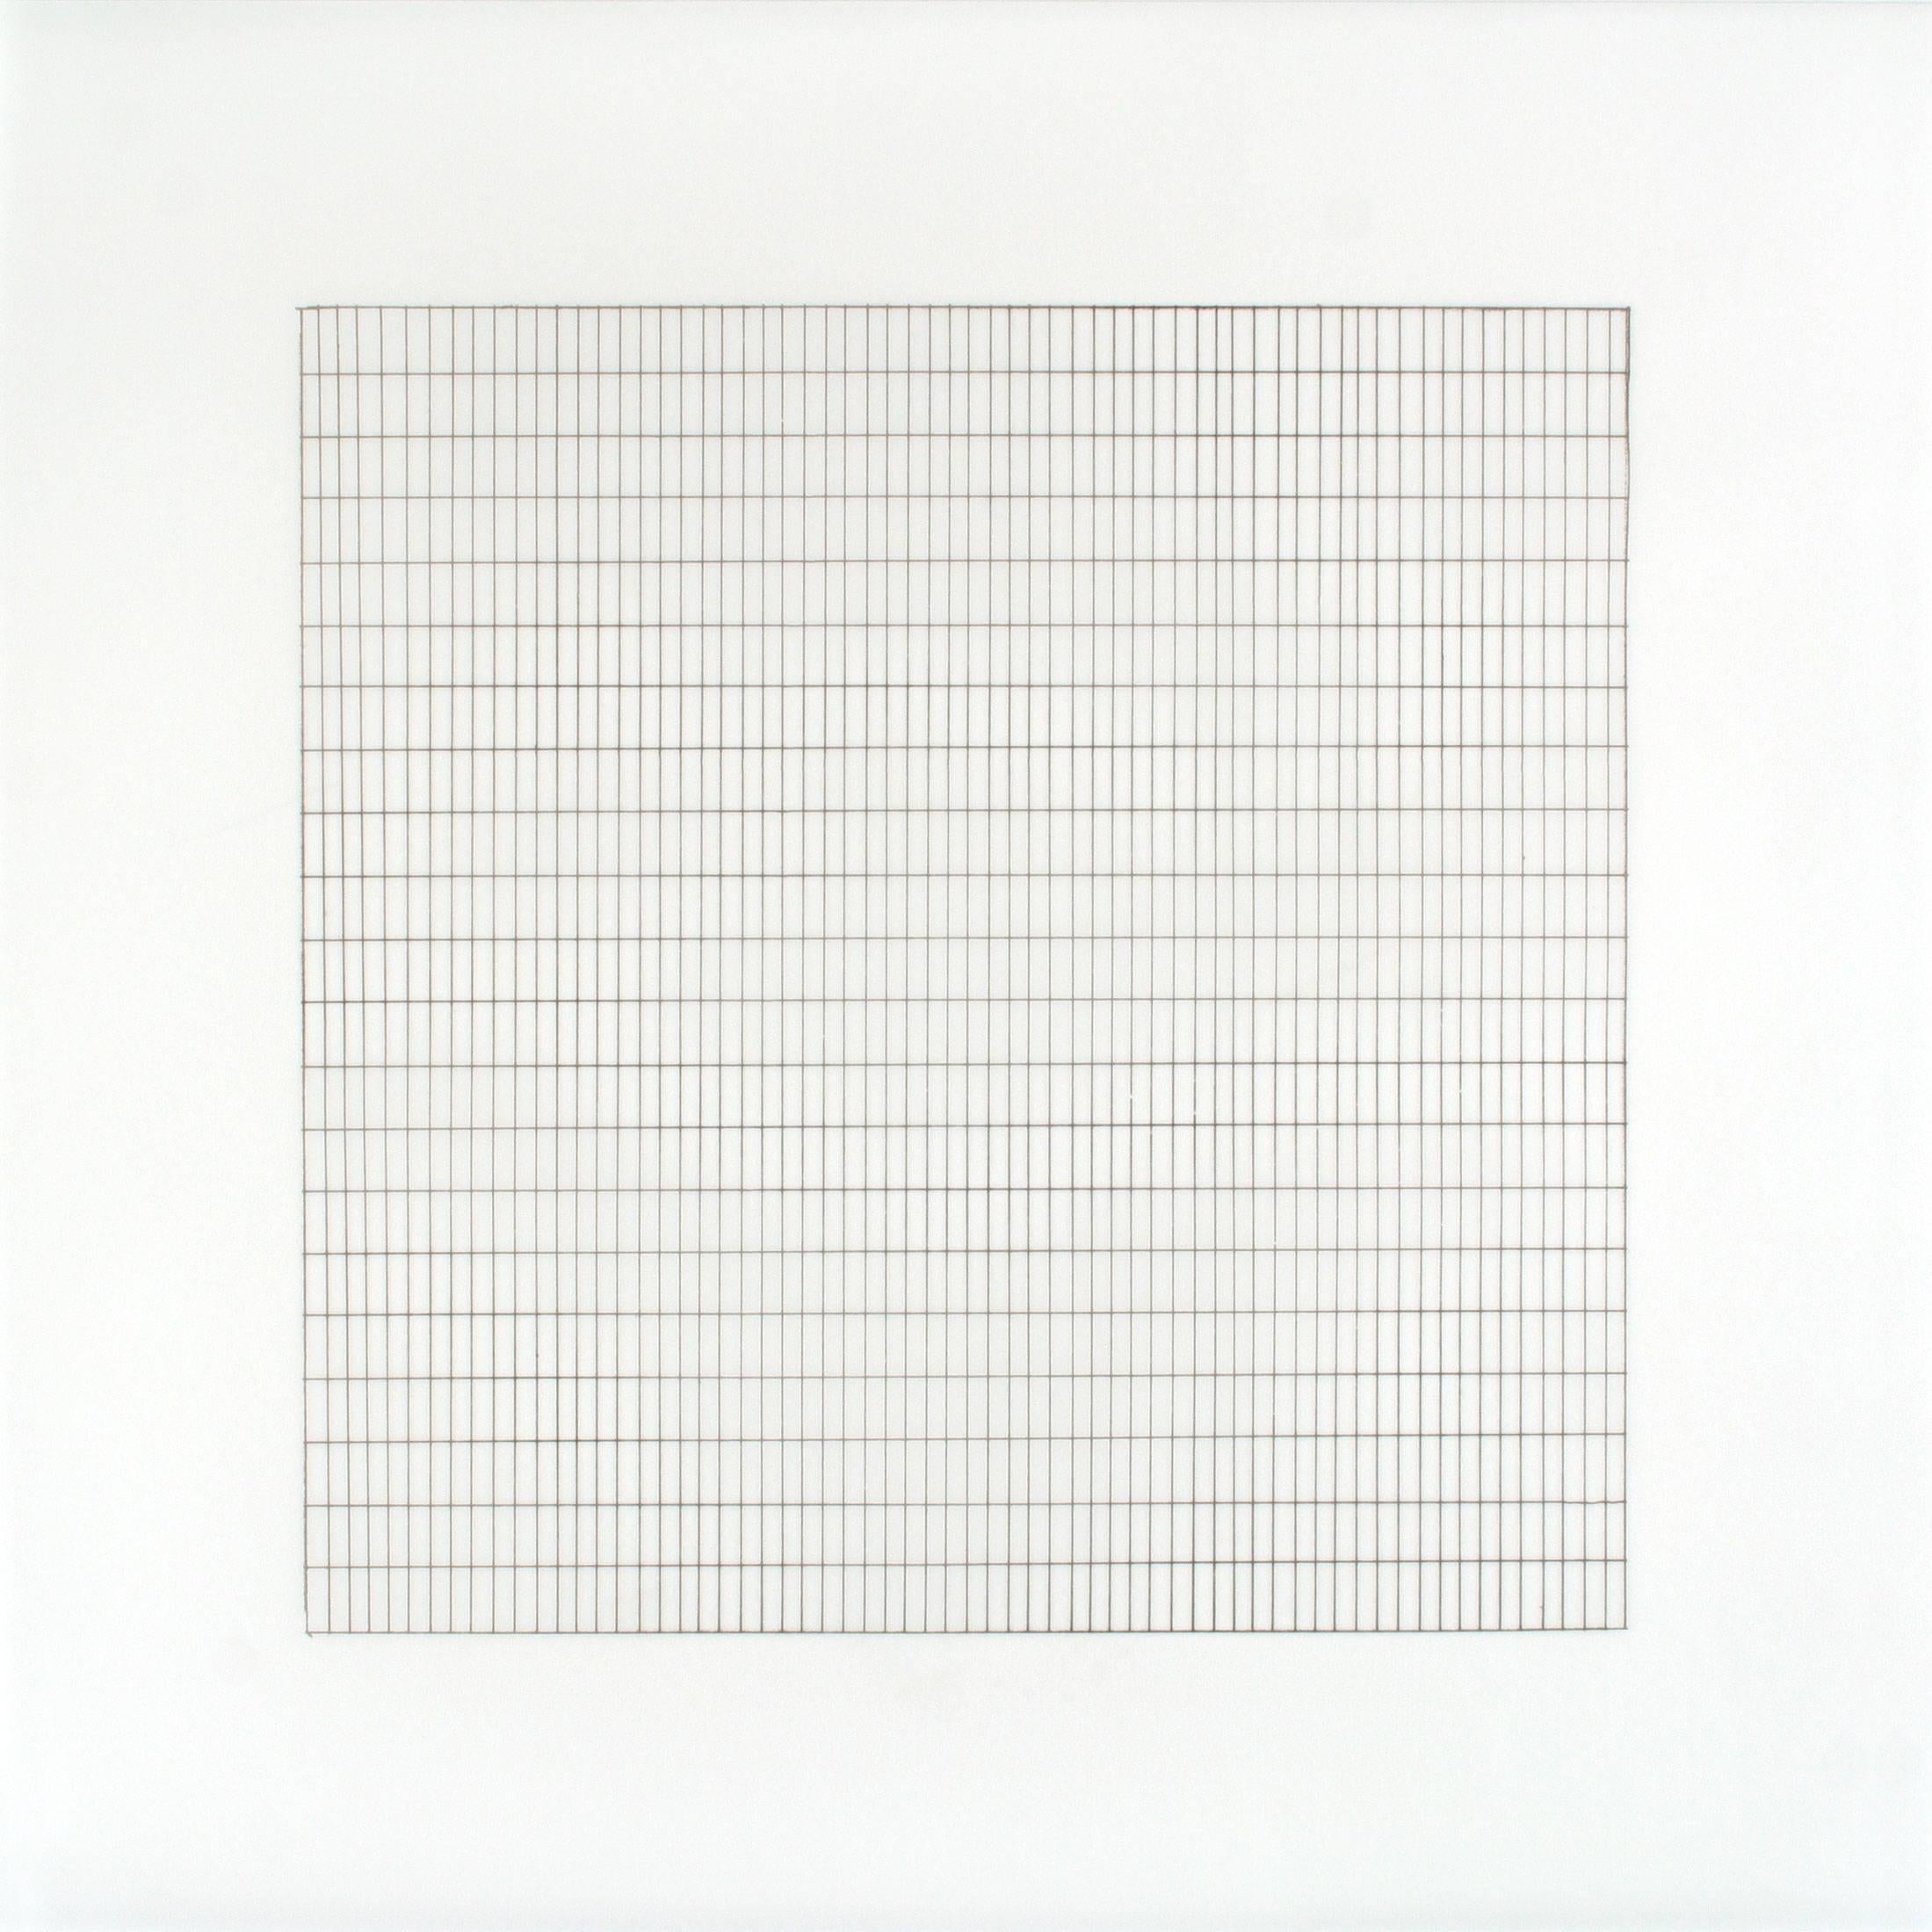 AGNES MARTIN. Paintings and Drawings 1974-1990 7